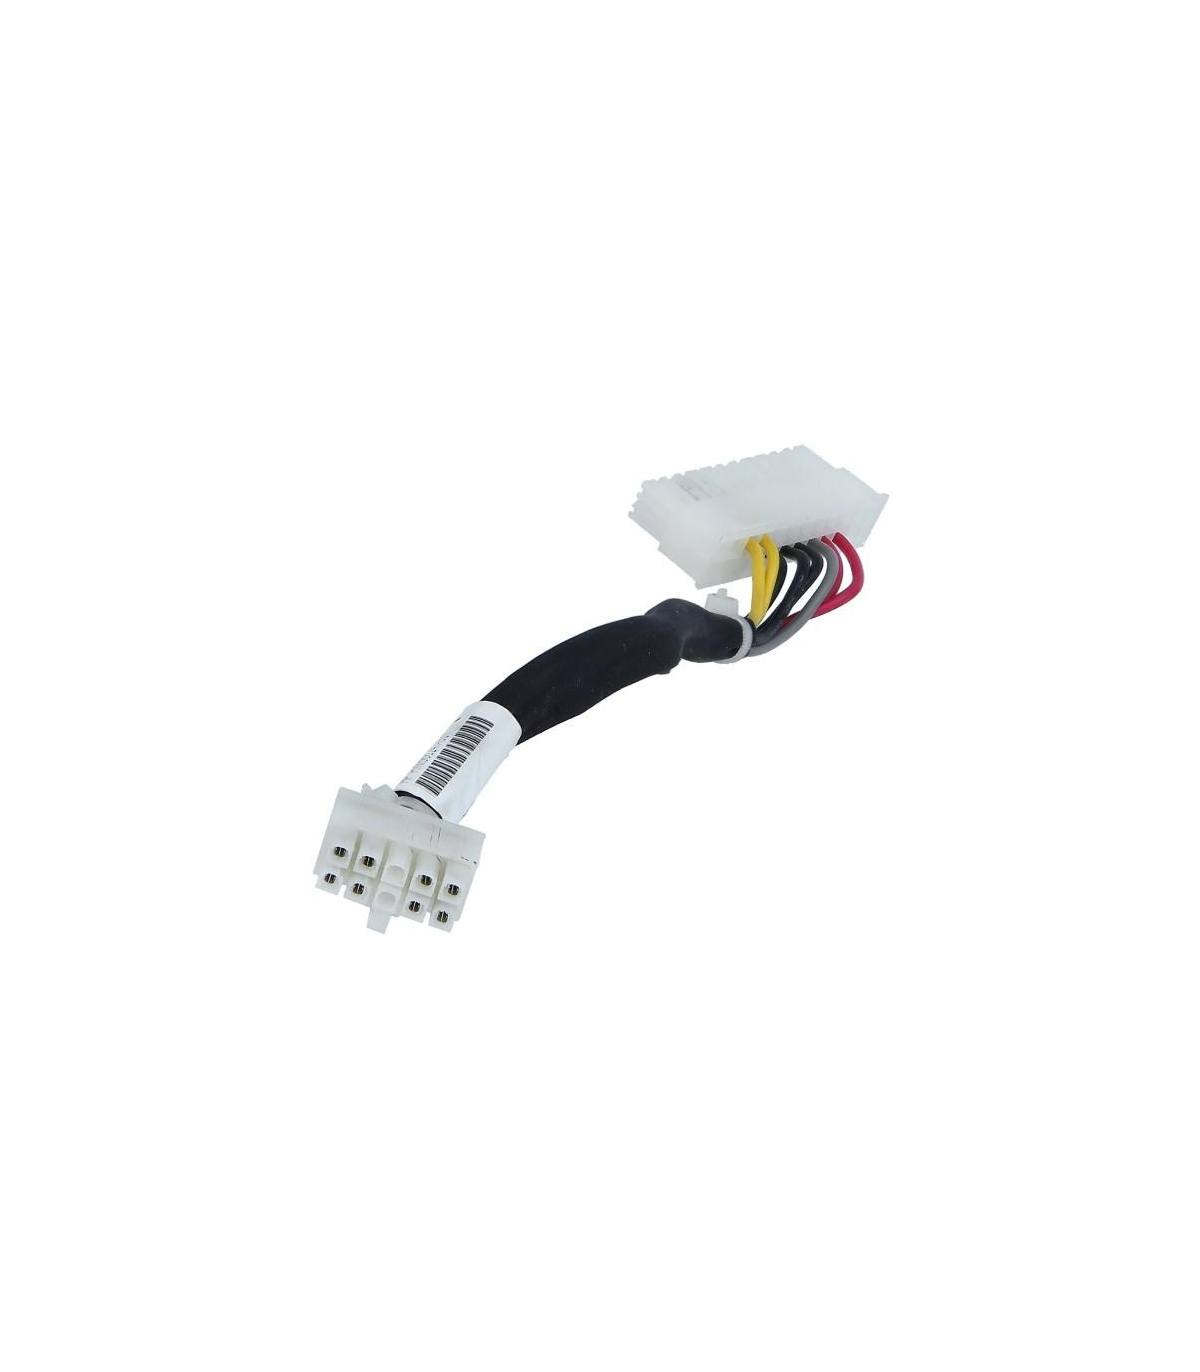 HP DL360E G8 STOREEASY DRIVE CAGE POWER CABLE 668241-001